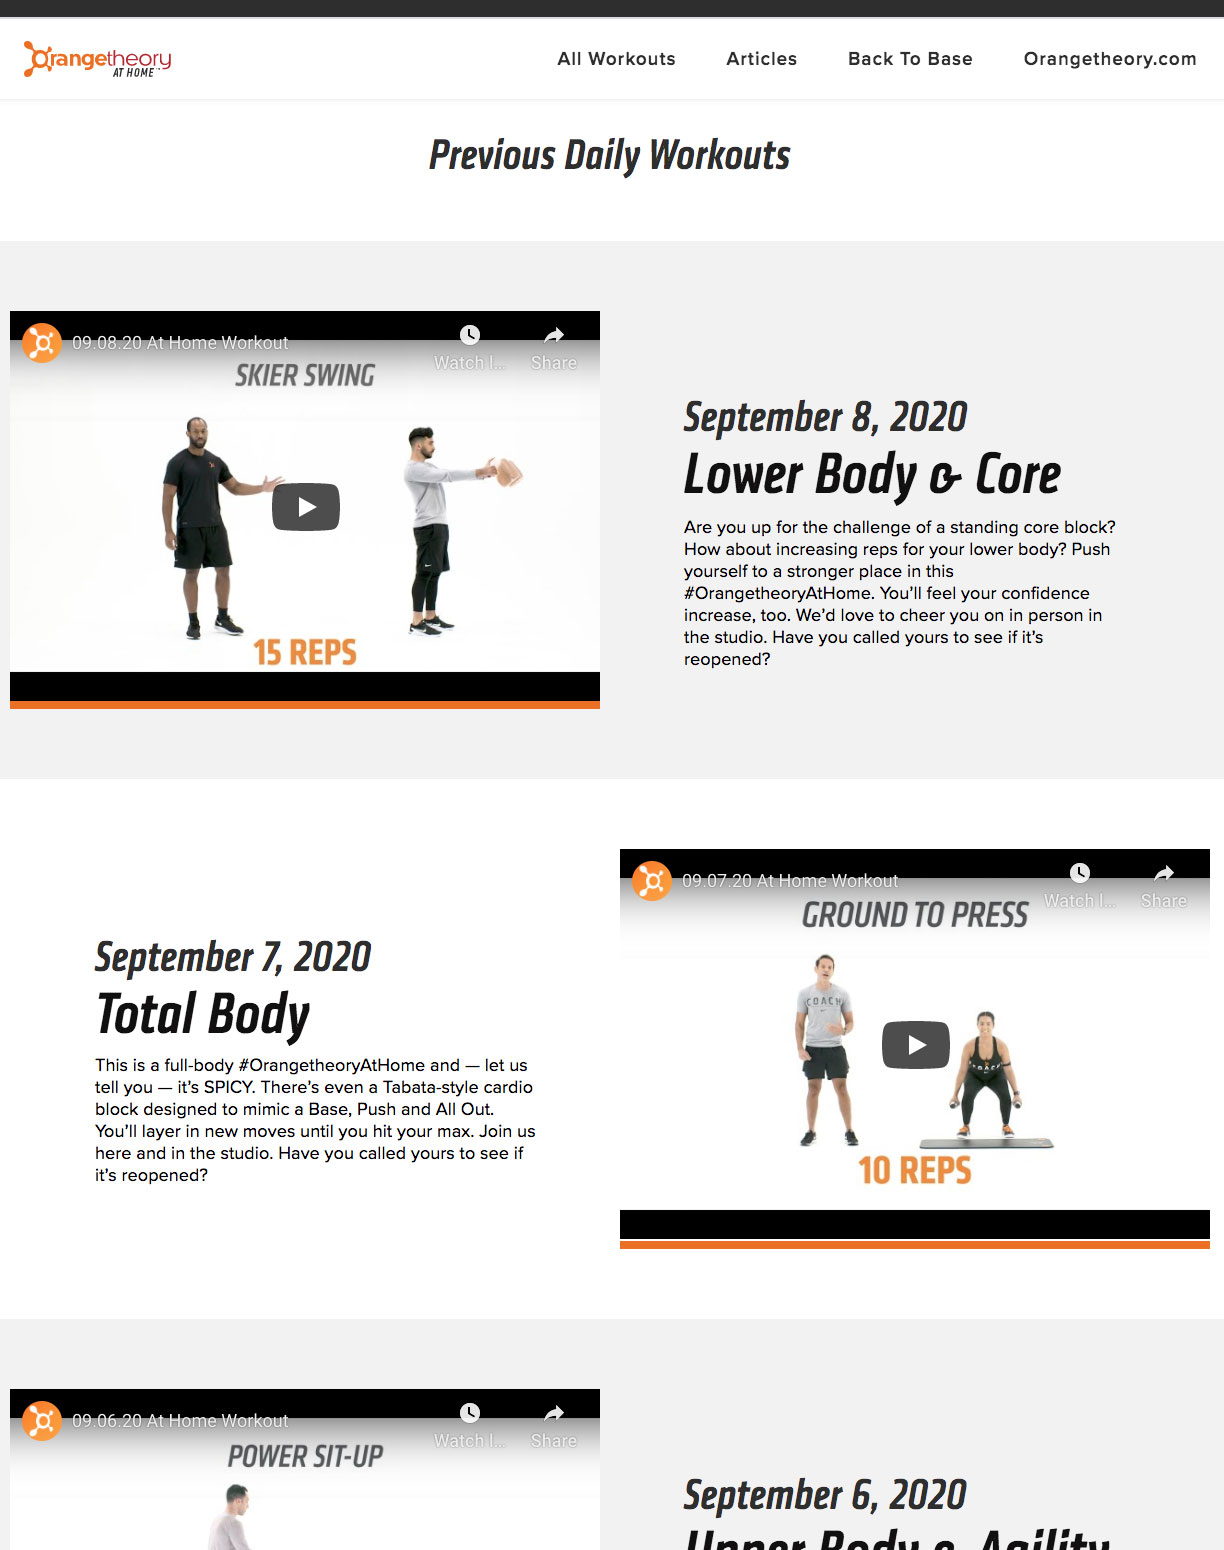 OTF-at-home_Previous Workout